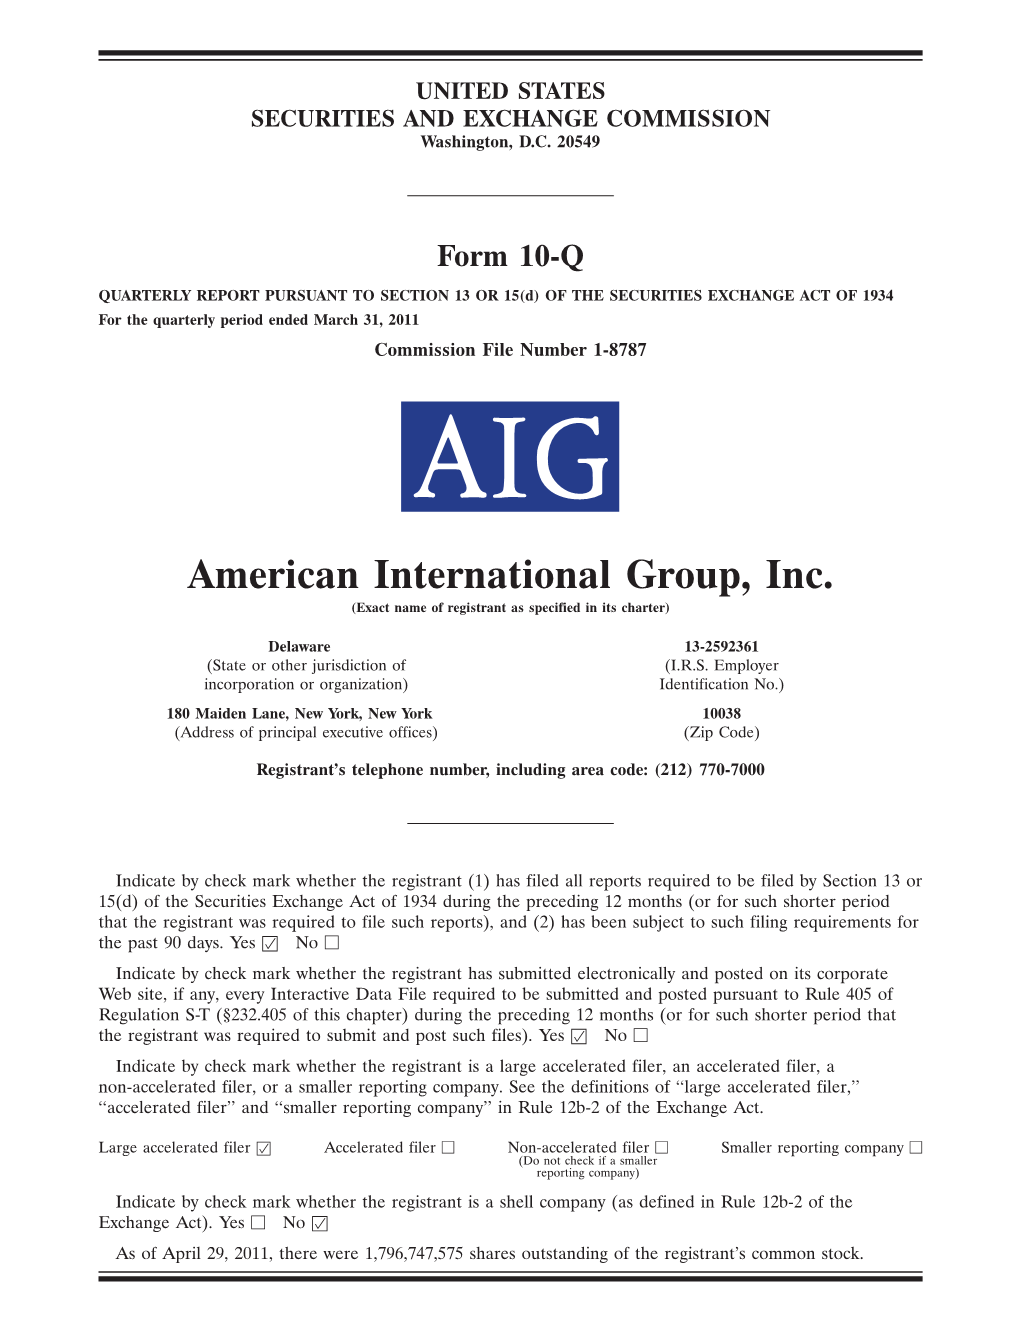 American International Group, Inc. (Exact Name of Registrant As Specified in Its Charter)